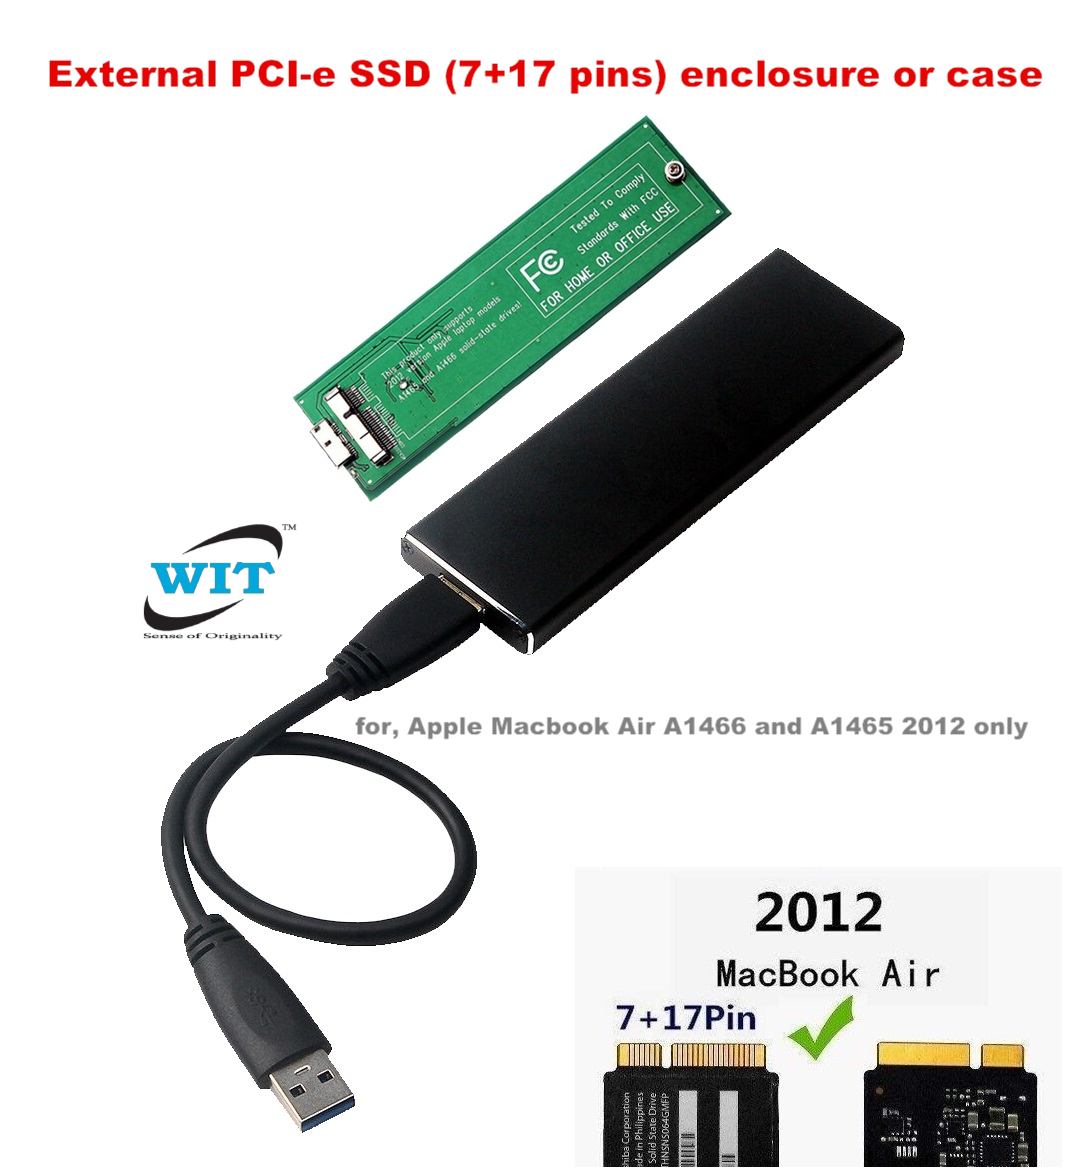 External PCI-e SSD (7+17 enclosure or case for Apple Macbook Air A1466 and A1465 2012 only, USB 3.0 to Macbook Air A1466, A1465 (2012 only) SSD adapter - Computers